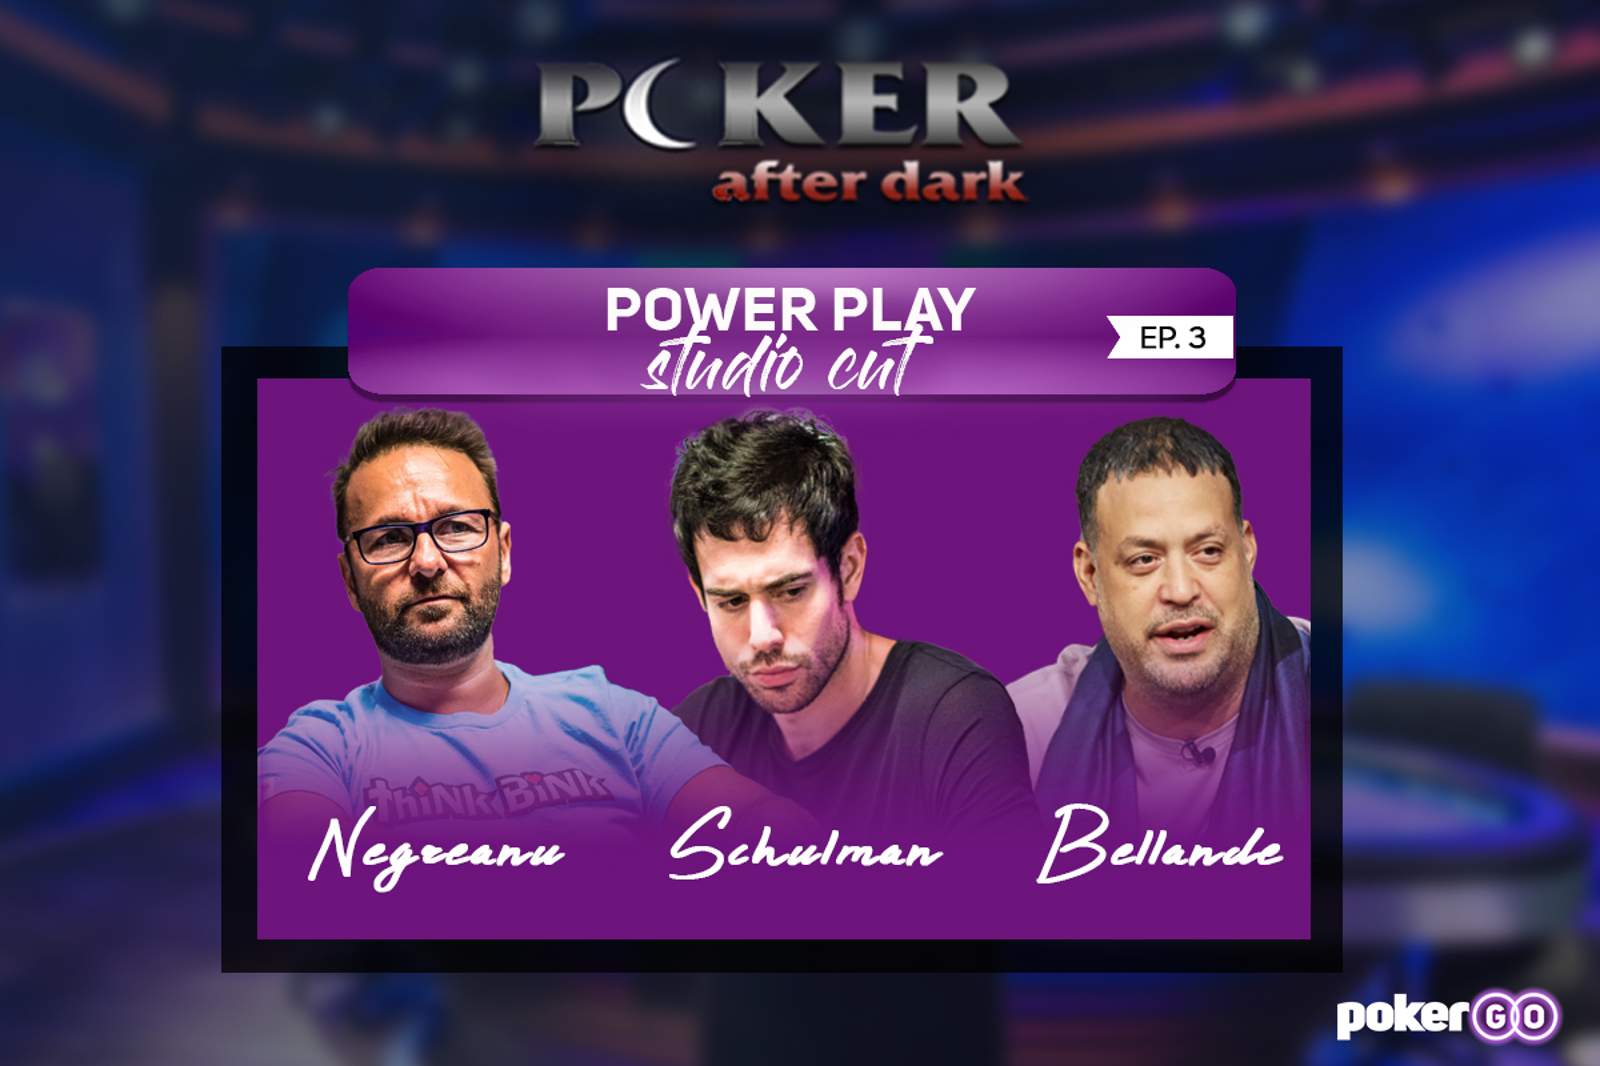 Poker After Dark Power Play Studio Cut Episode 3 on Tonight at 8 p.m. ET